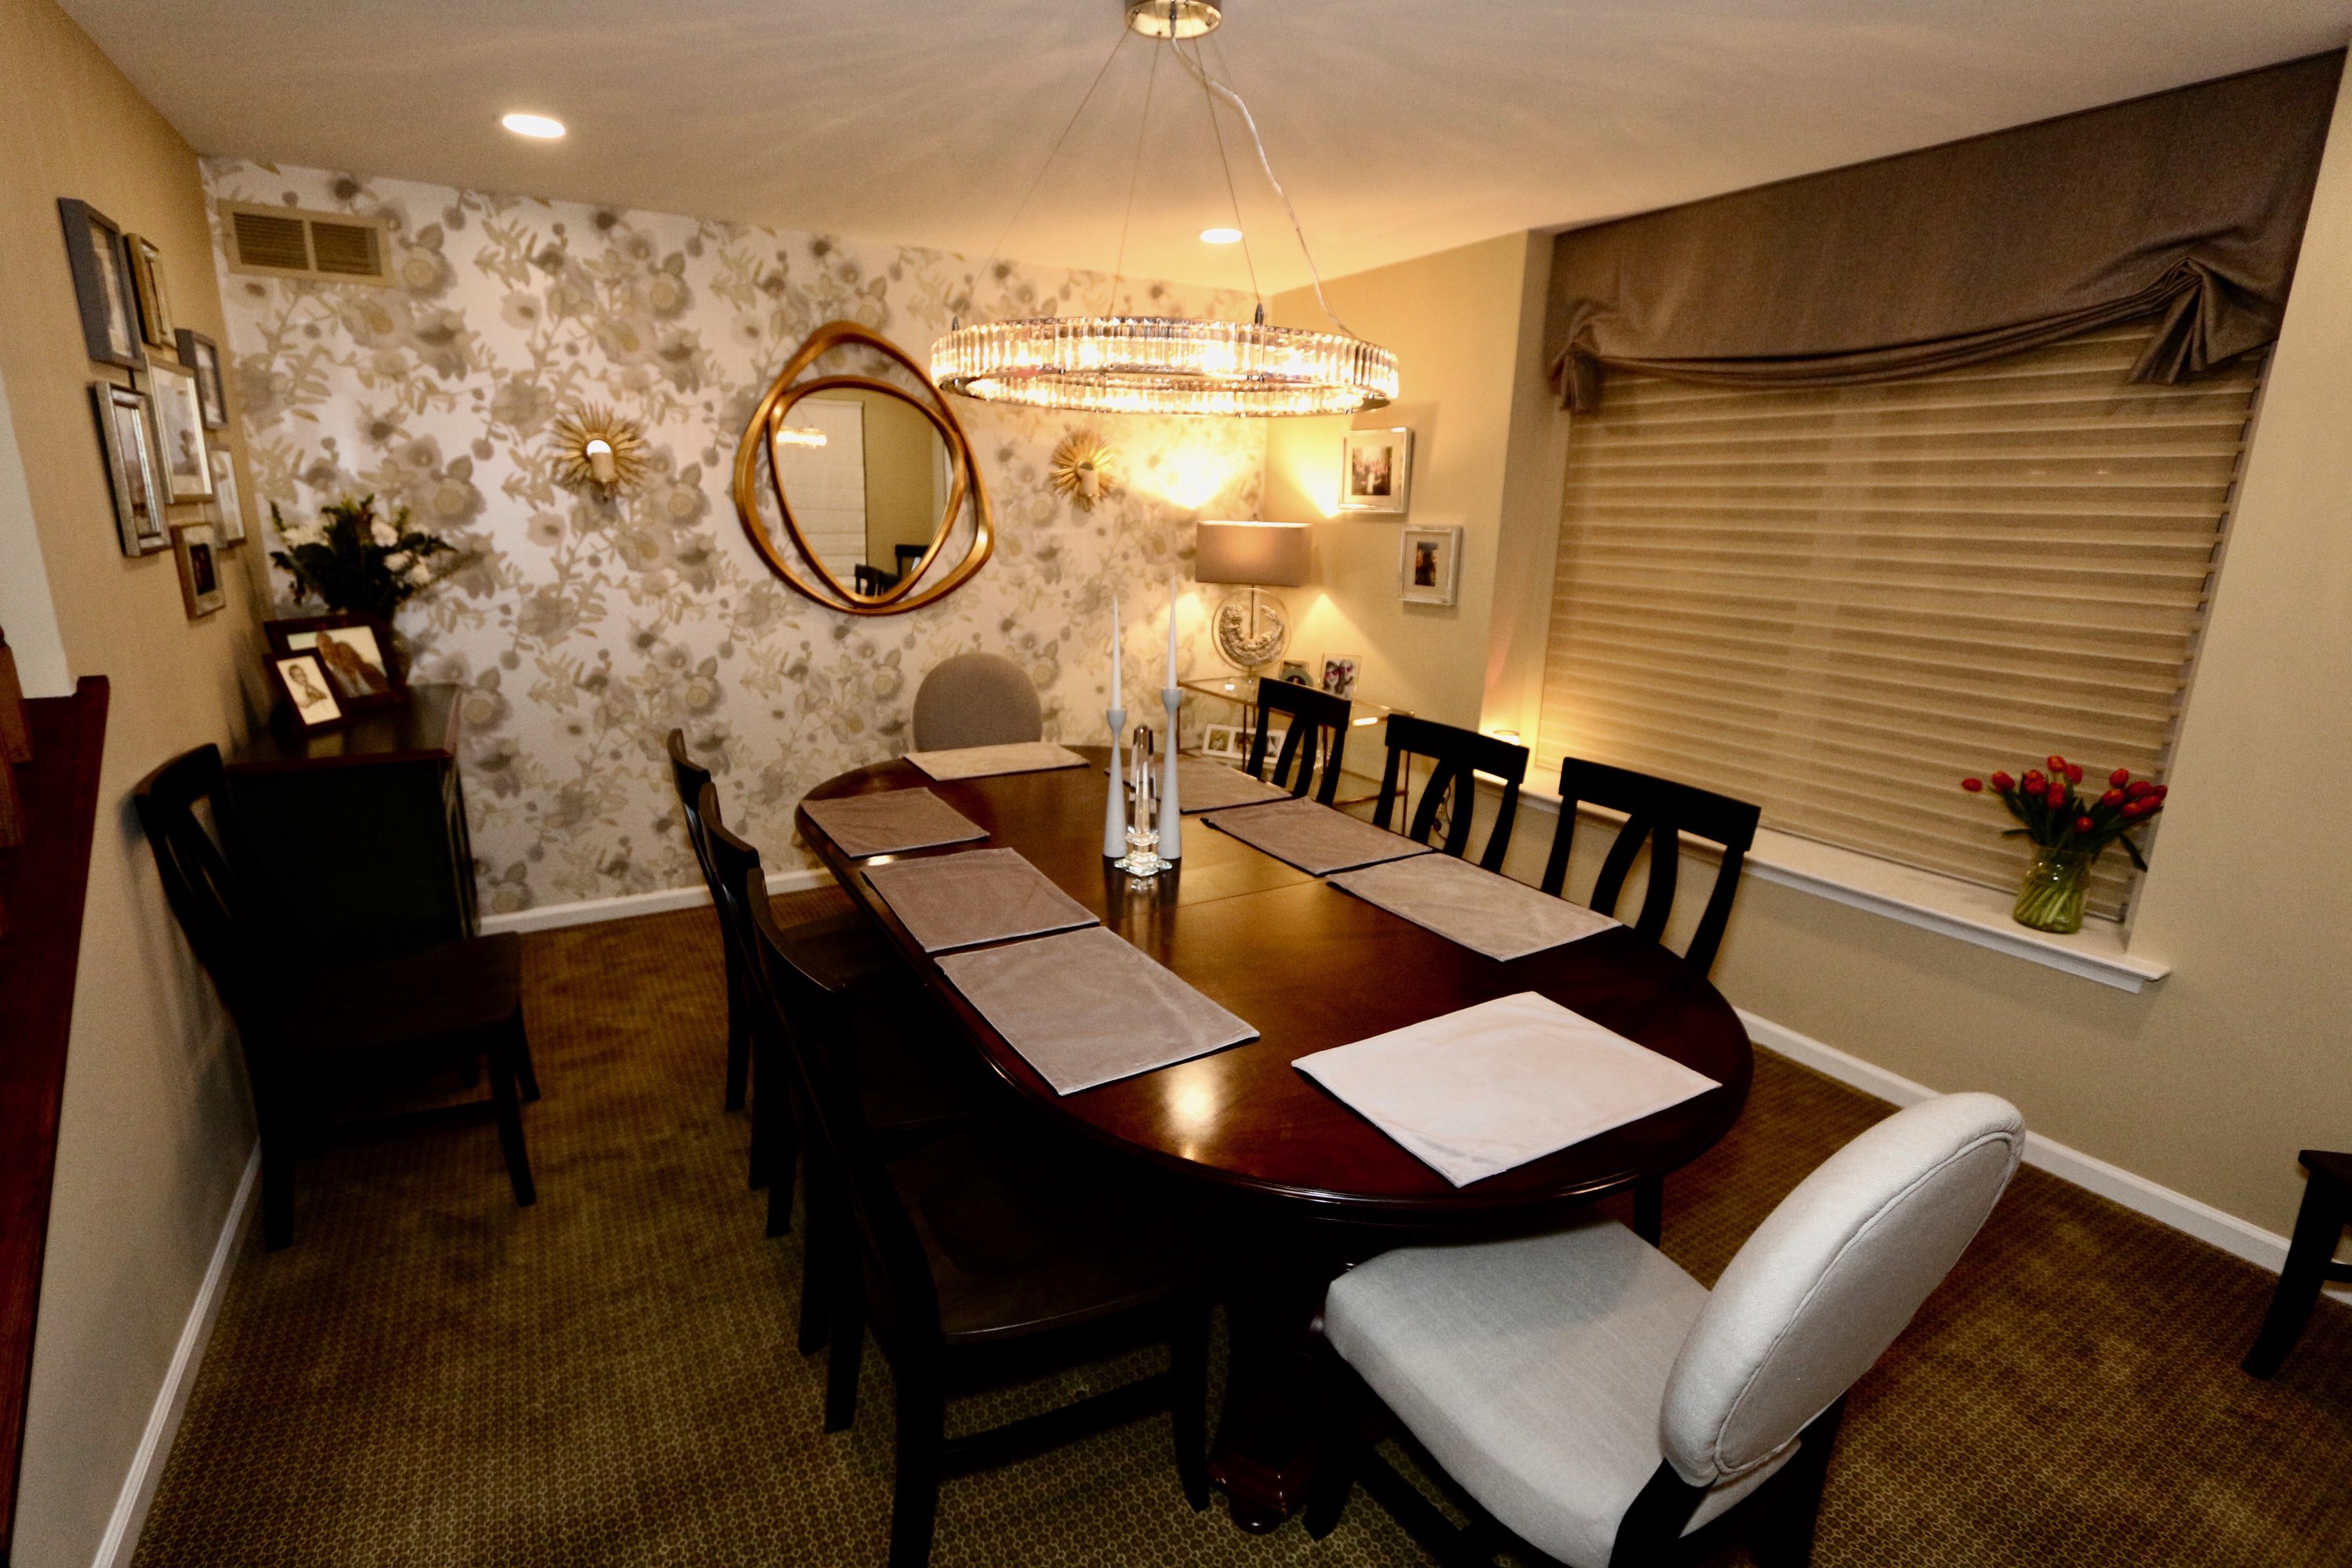 A dining room interior redesign with custom window treatments, drapery, and wallpaper